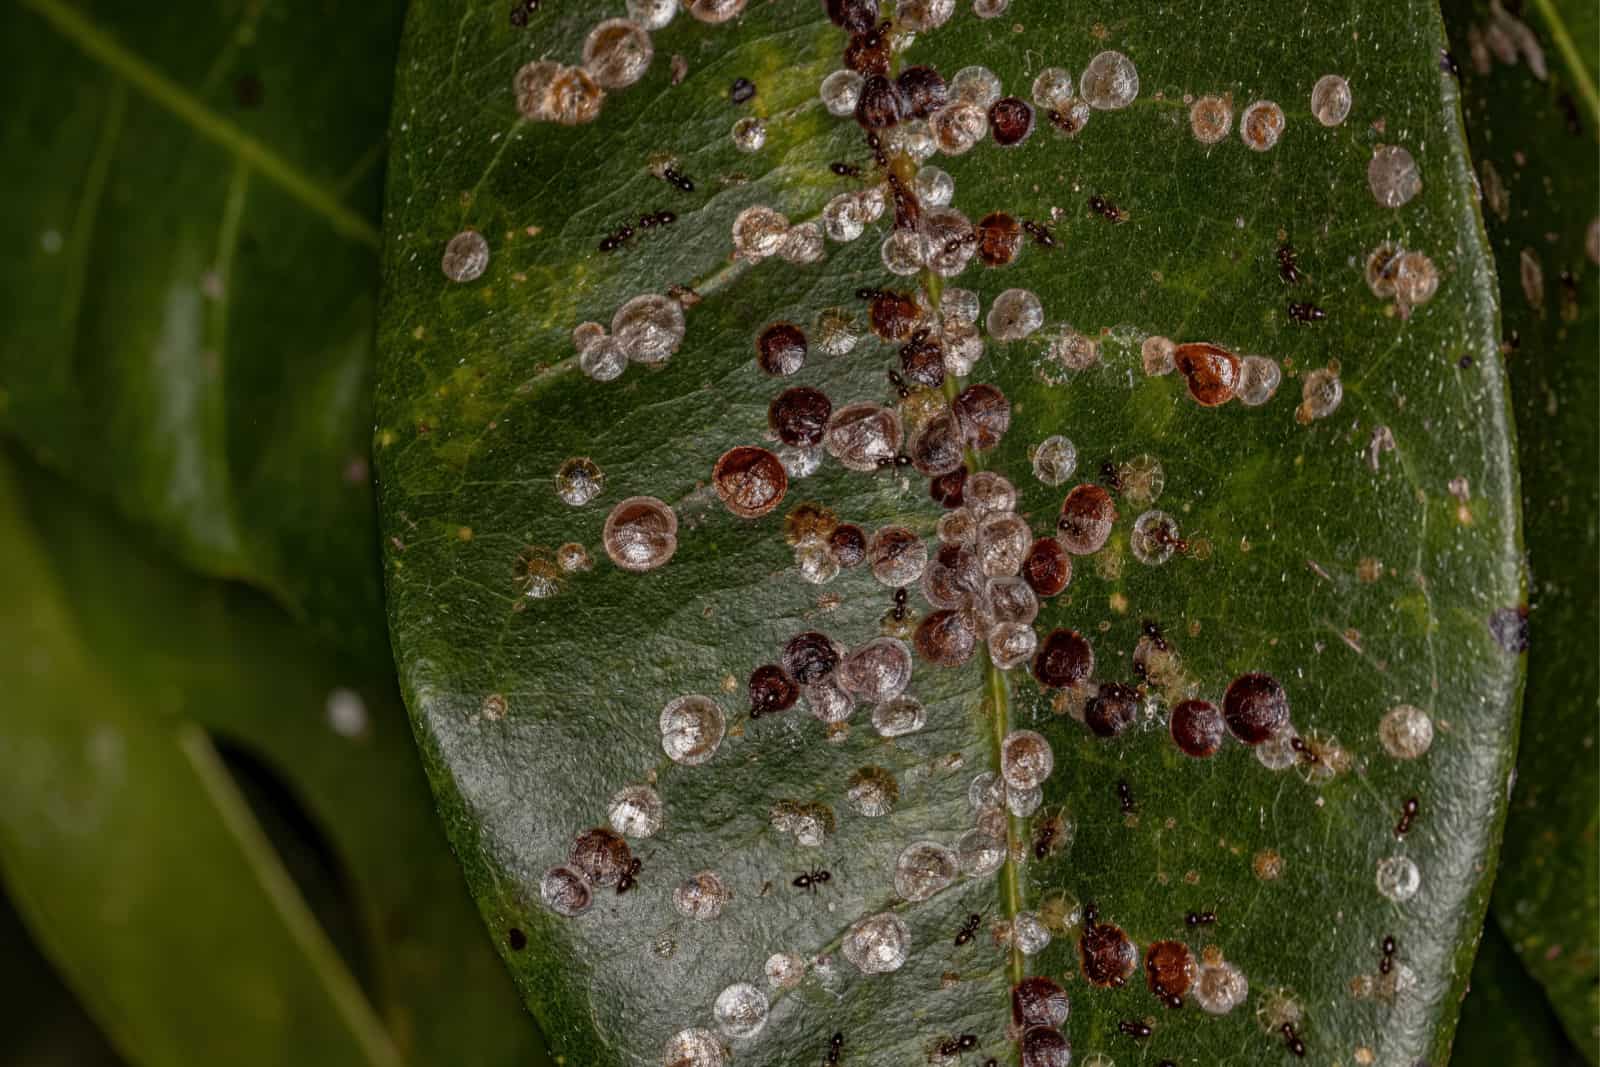 White Scale Insects of the Superfamily Coccoidea on a Provision Tree Leaf of the species Pachira aquatica